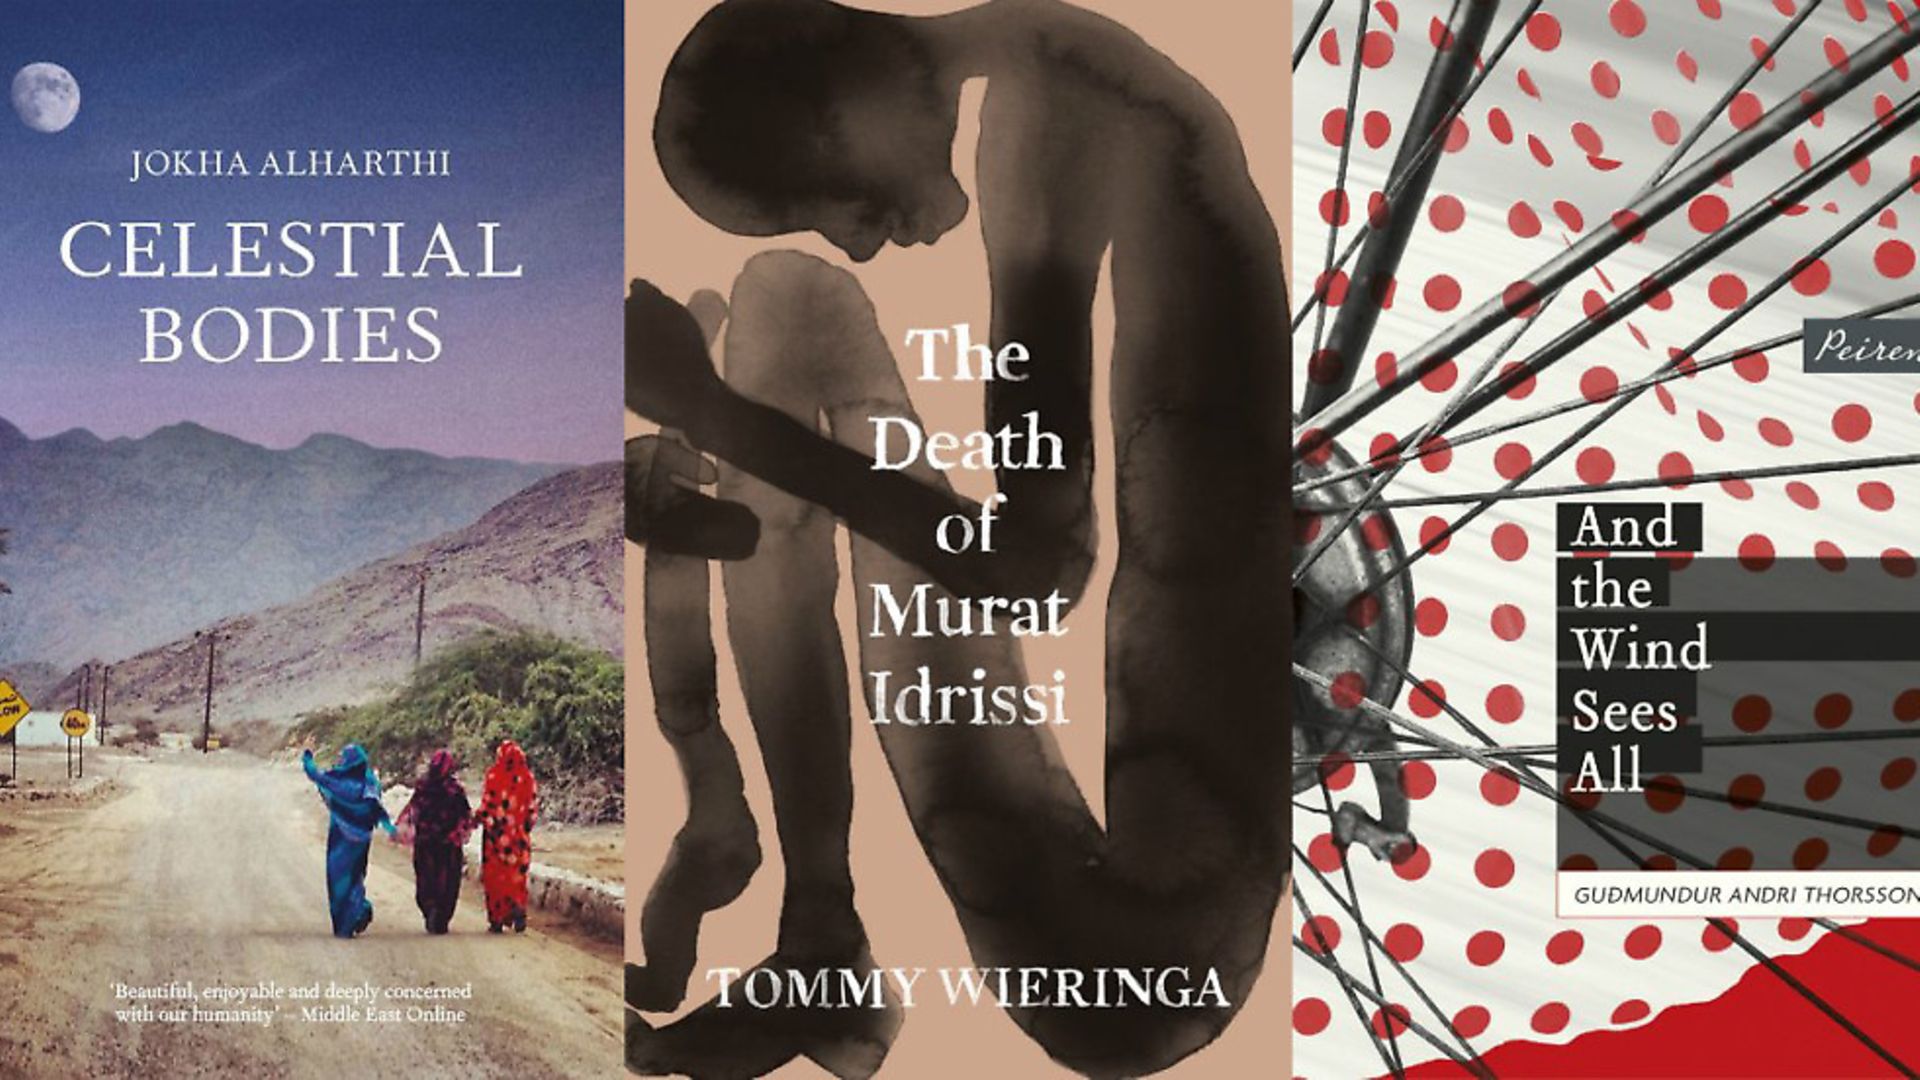 L-R: Celestial Bodies, by Jokha Alharthi (Sandstone Press), The Death of Murat Idrissi, by Tommy Wieringa (Scribe), and And The Wind Sees All, by Gudmundur Andri Thompson ( Pelrene Press). Images: Sandstone Press, Scrive, Pelrene Press - Credit: Archant